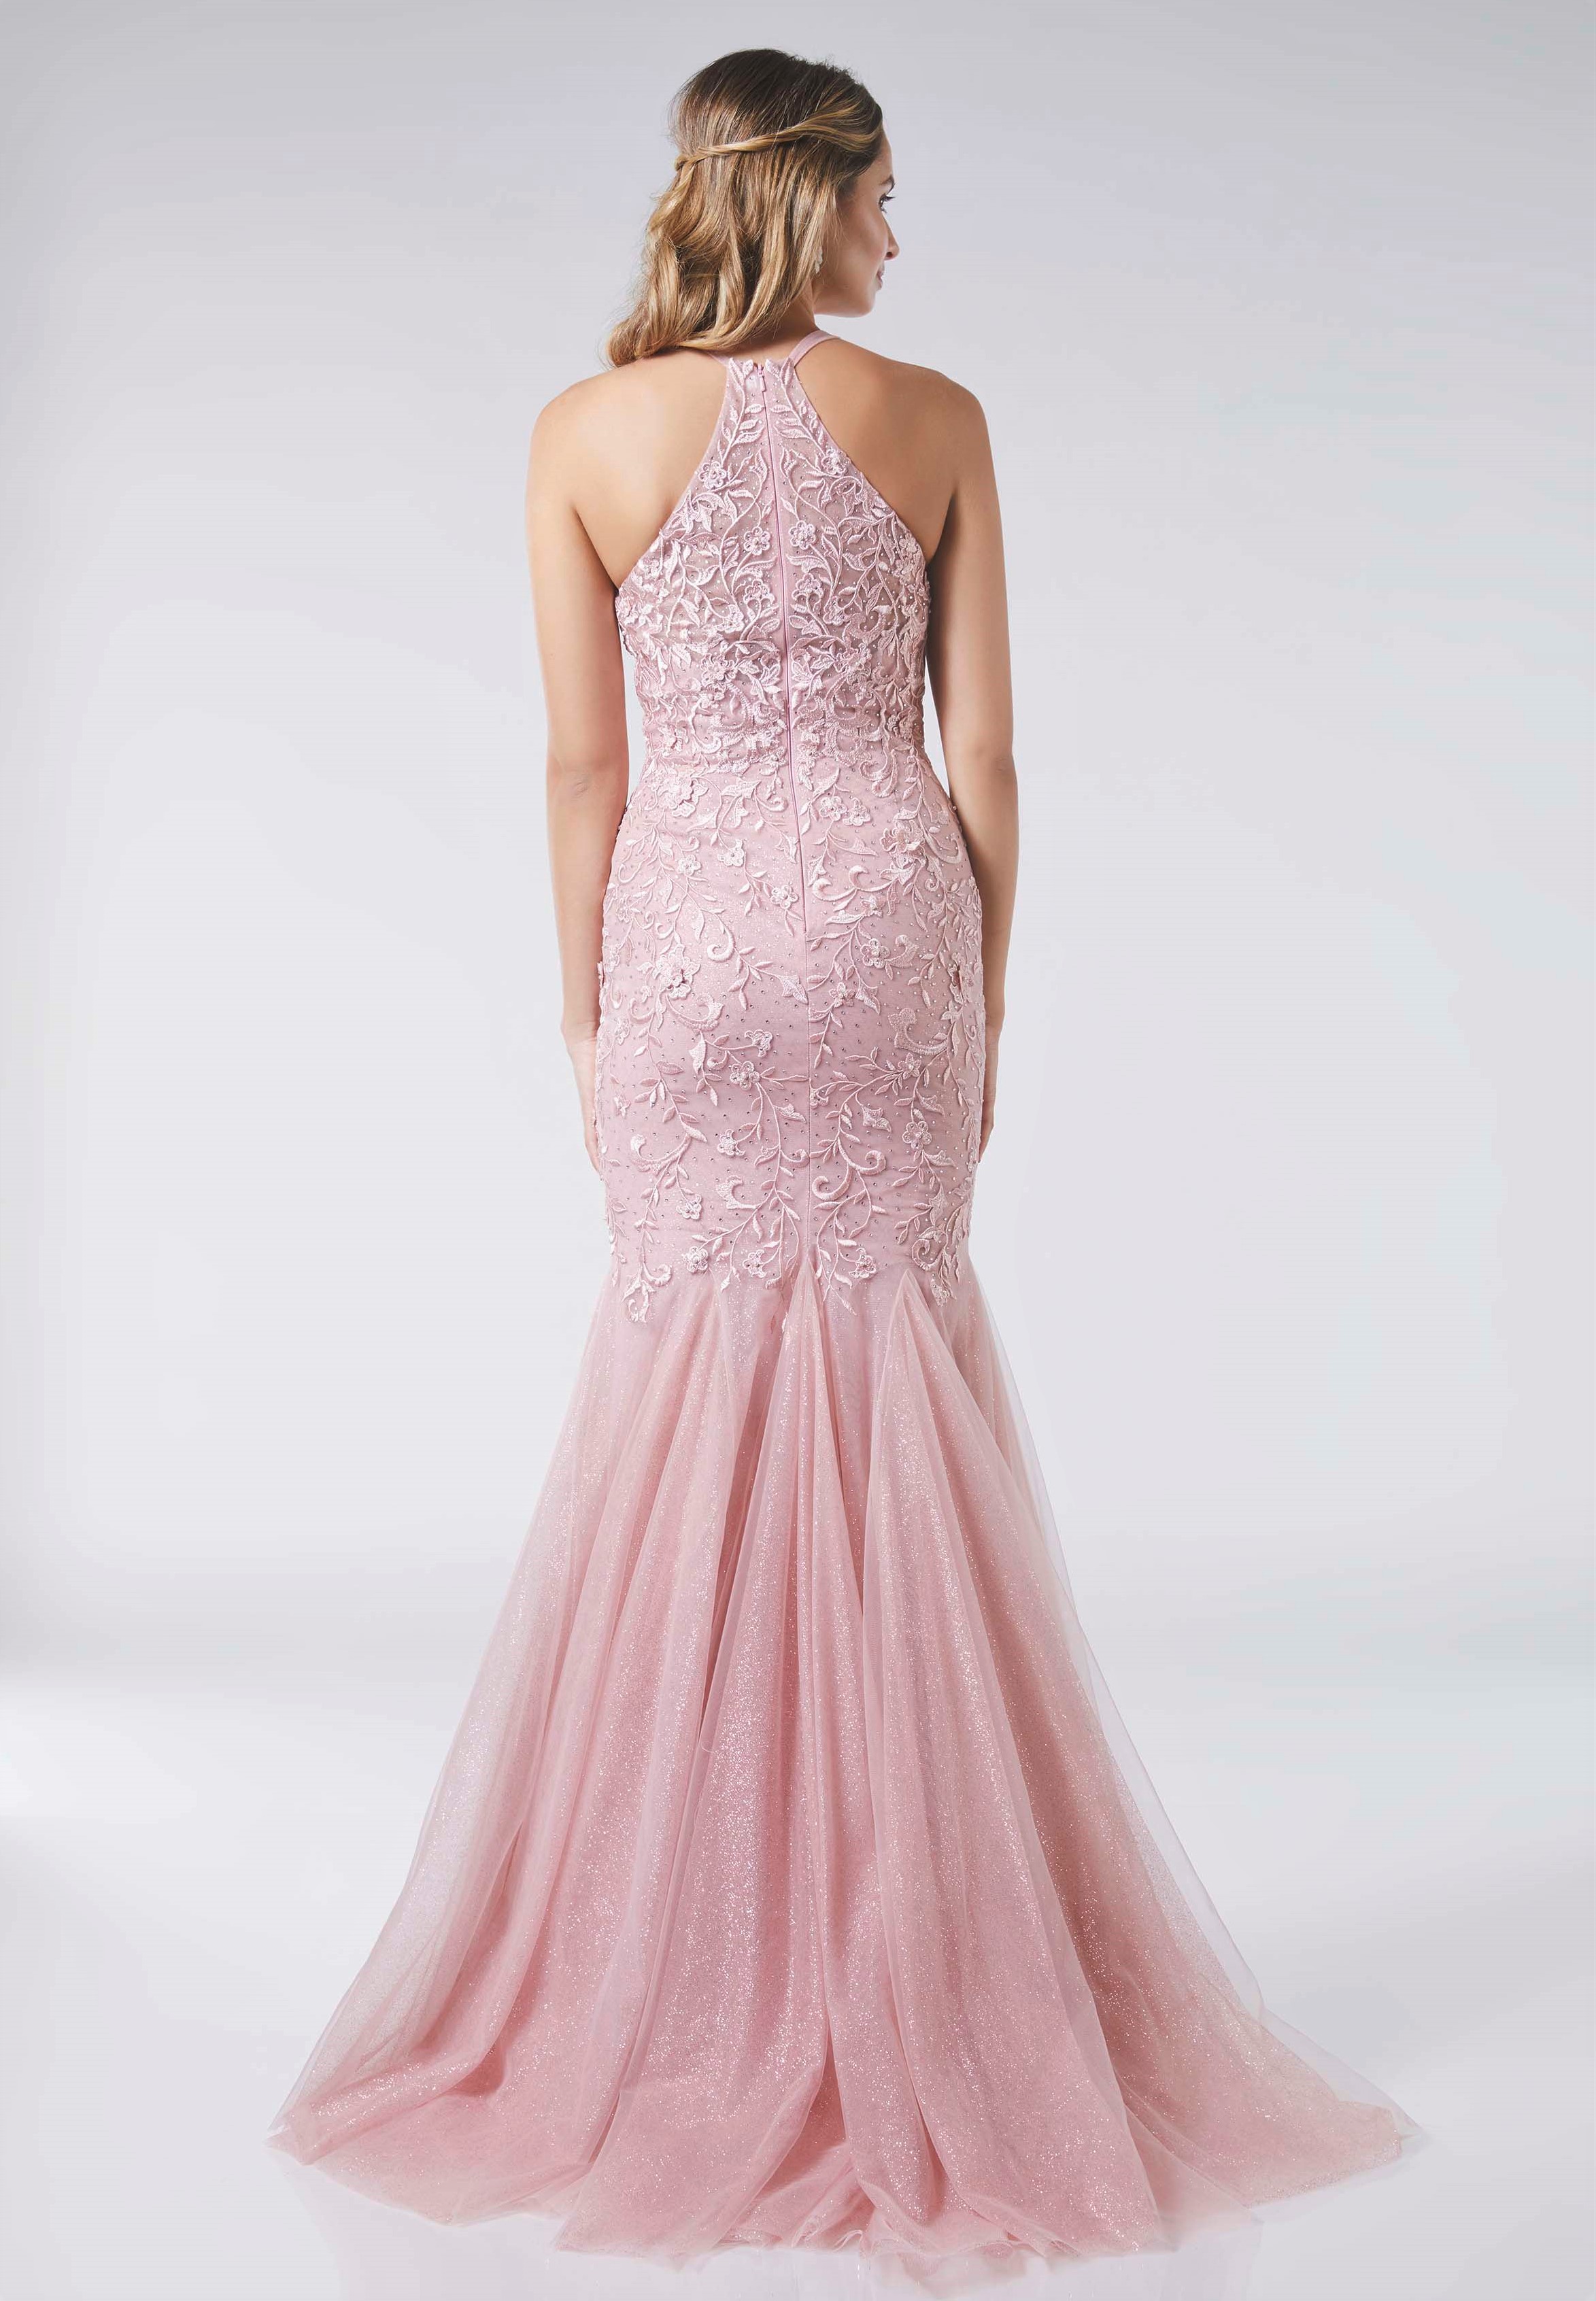 1/2 PRICE Lace, high neck, fishtail prom dress at Ball